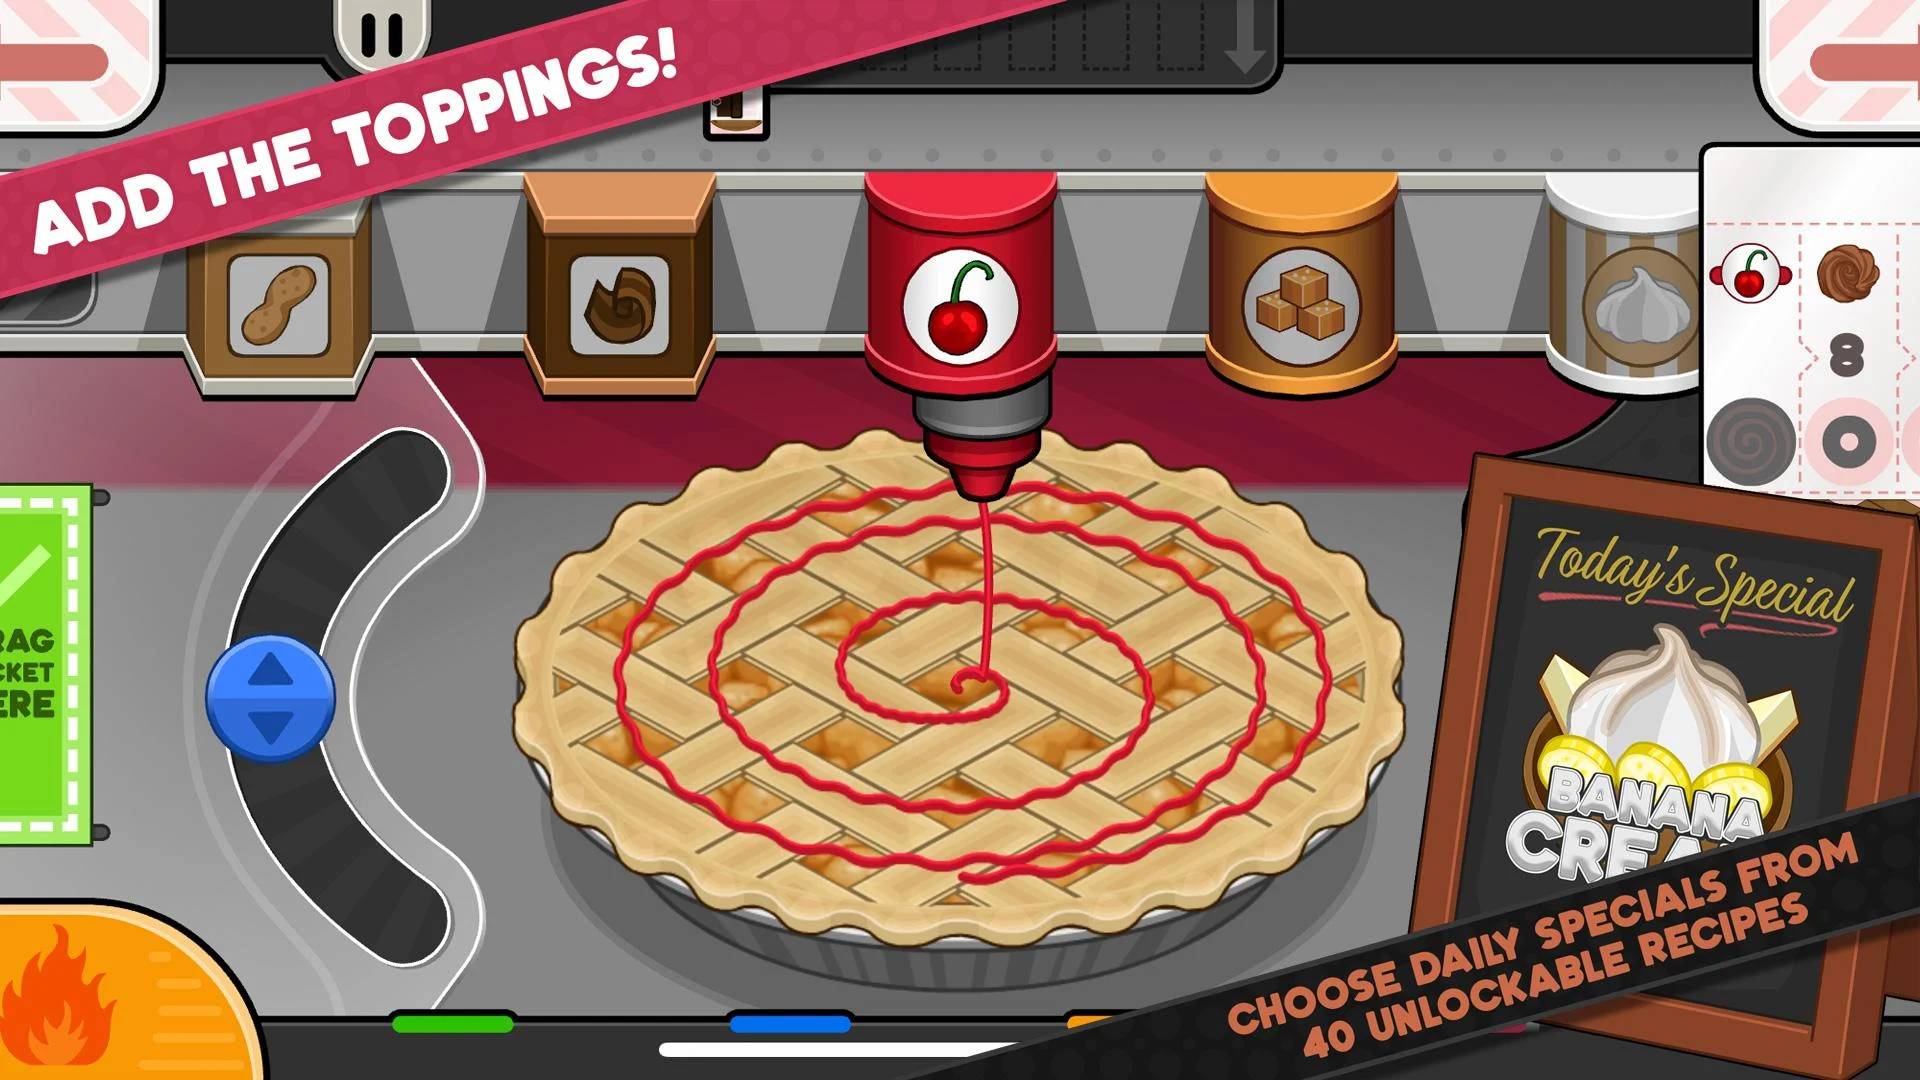 Papa's Cupcakeria HD APK + Mod 1.1.1 - Download Free for Android